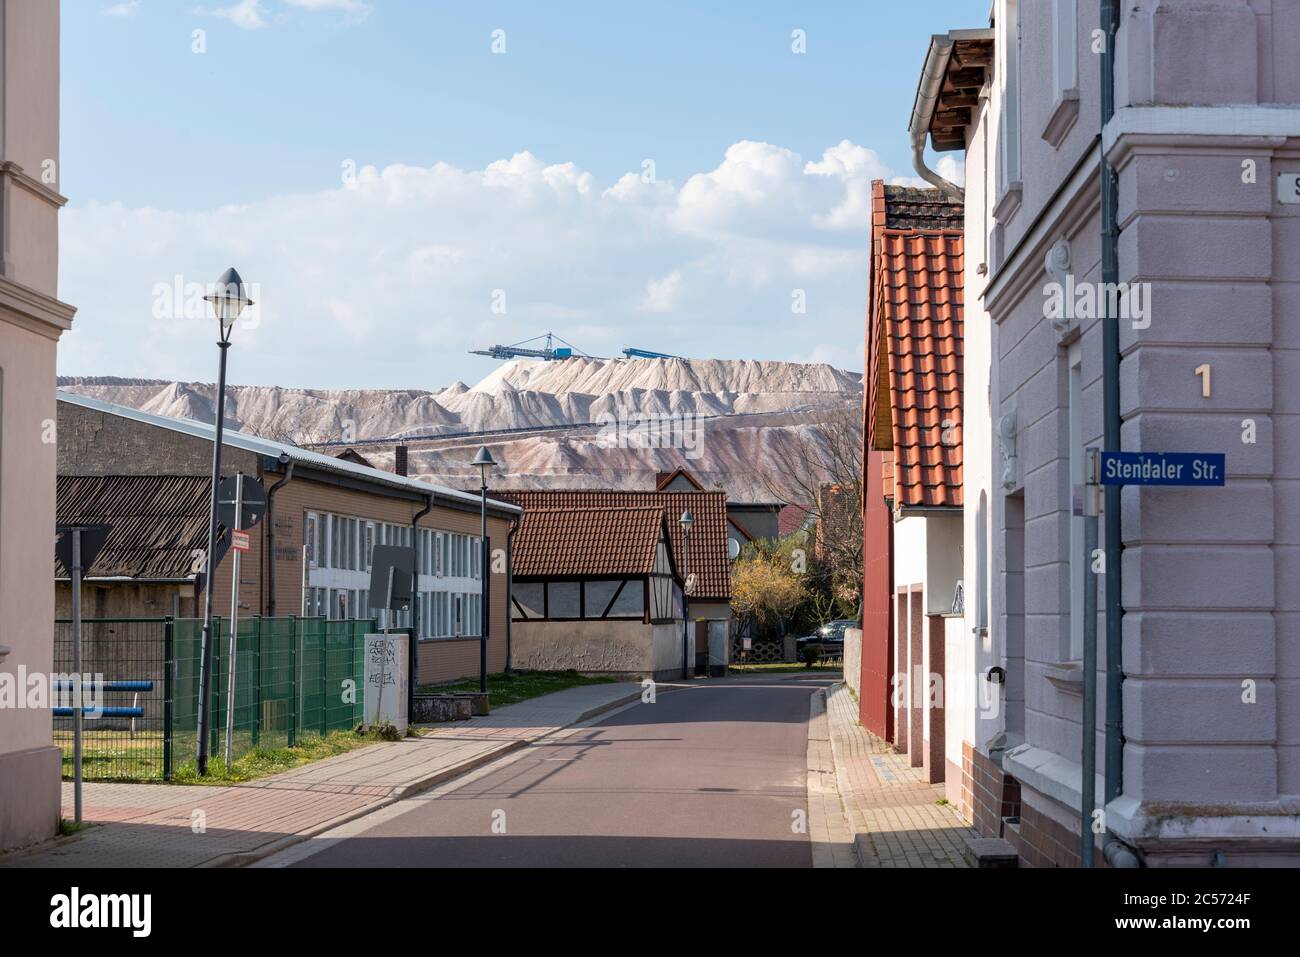 Germany, Saxony-Anhalt, Loitsche: Behind half-timbered houses, the tailings dump of the Zielitz potash works. K&S Kali GmbH is one of the leading salt Stock Photo